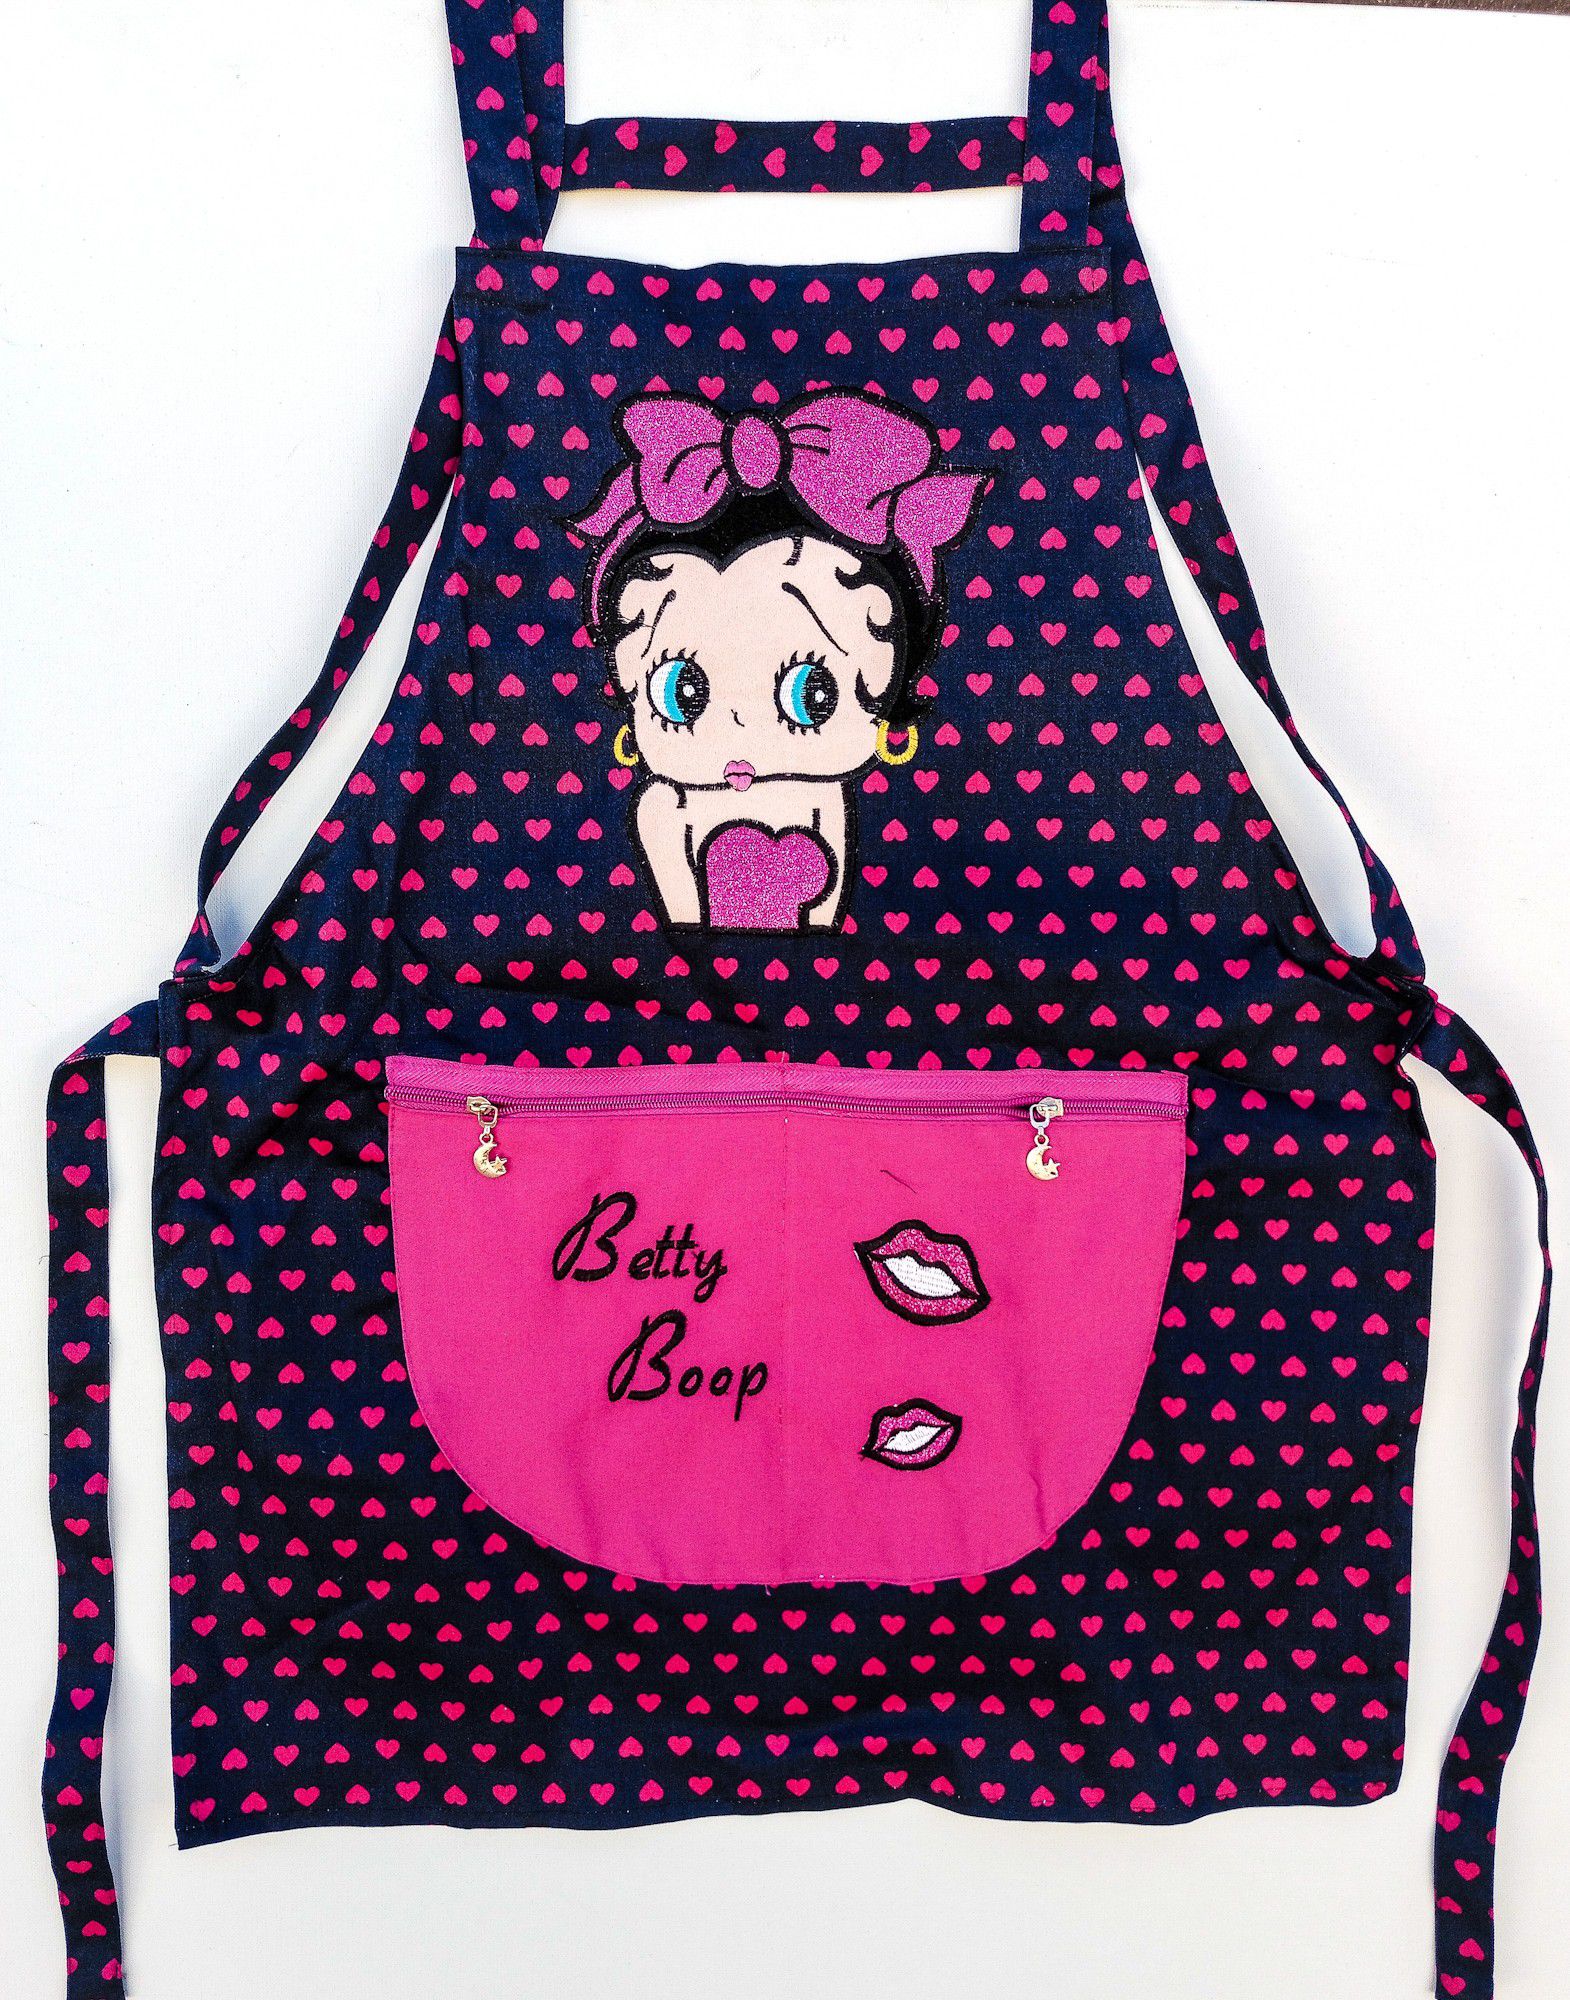 Betty boop Embroided Apron for Adult with zipper pockets on front